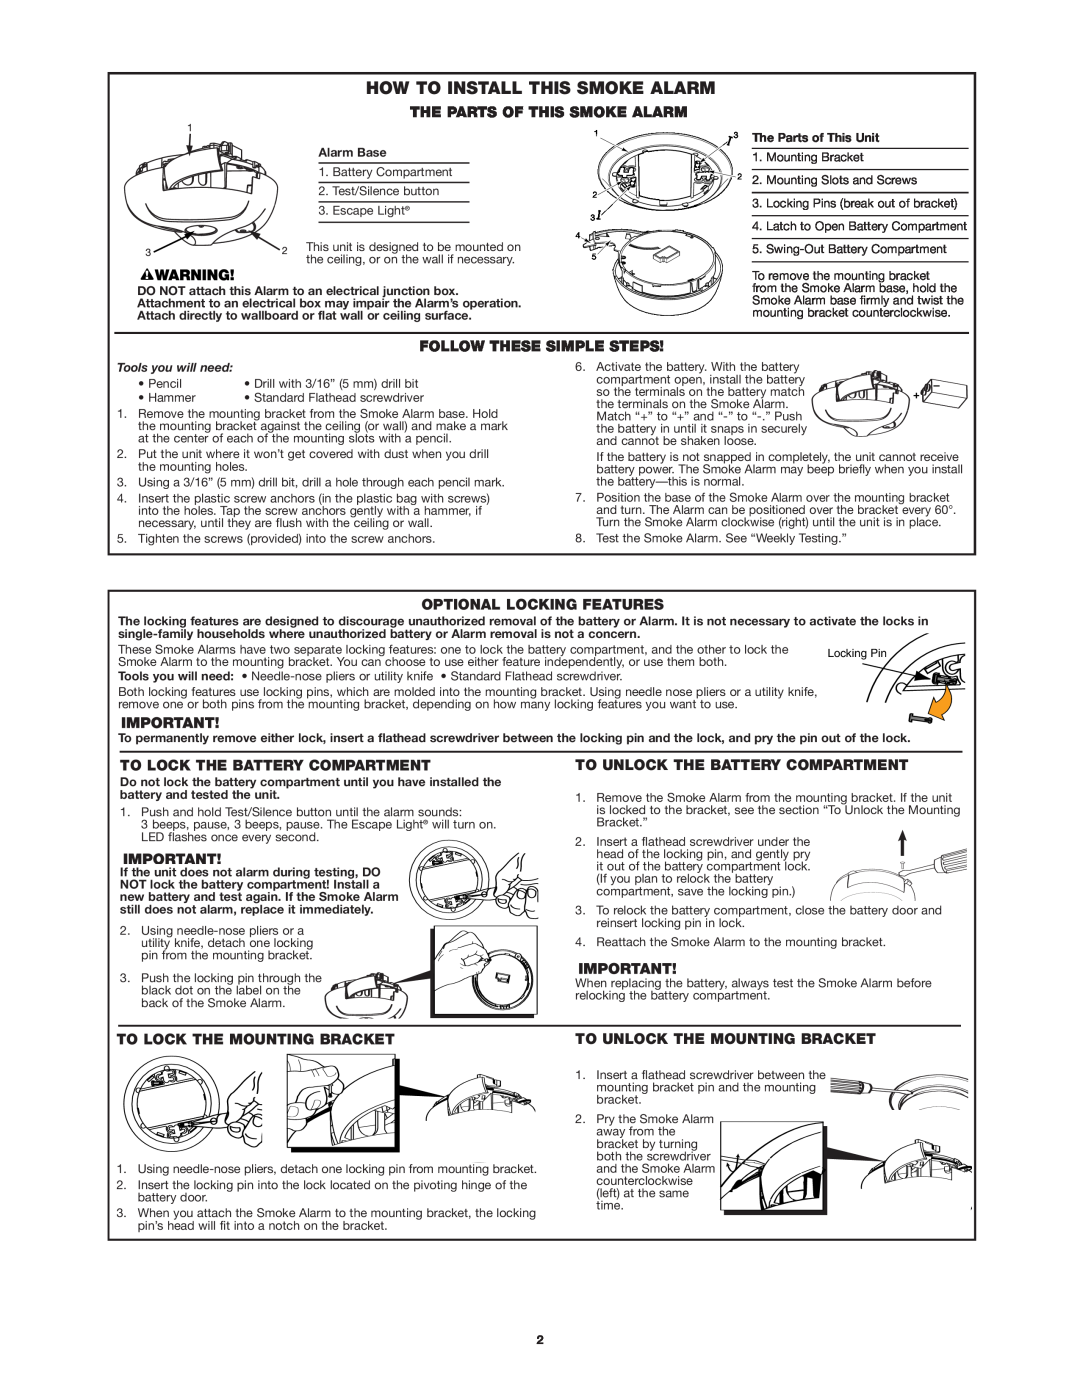 First Alert SA304 user manual How To Install This Smoke Alarm, The Parts Of This Smoke Alarm, Follow These Simple Steps 